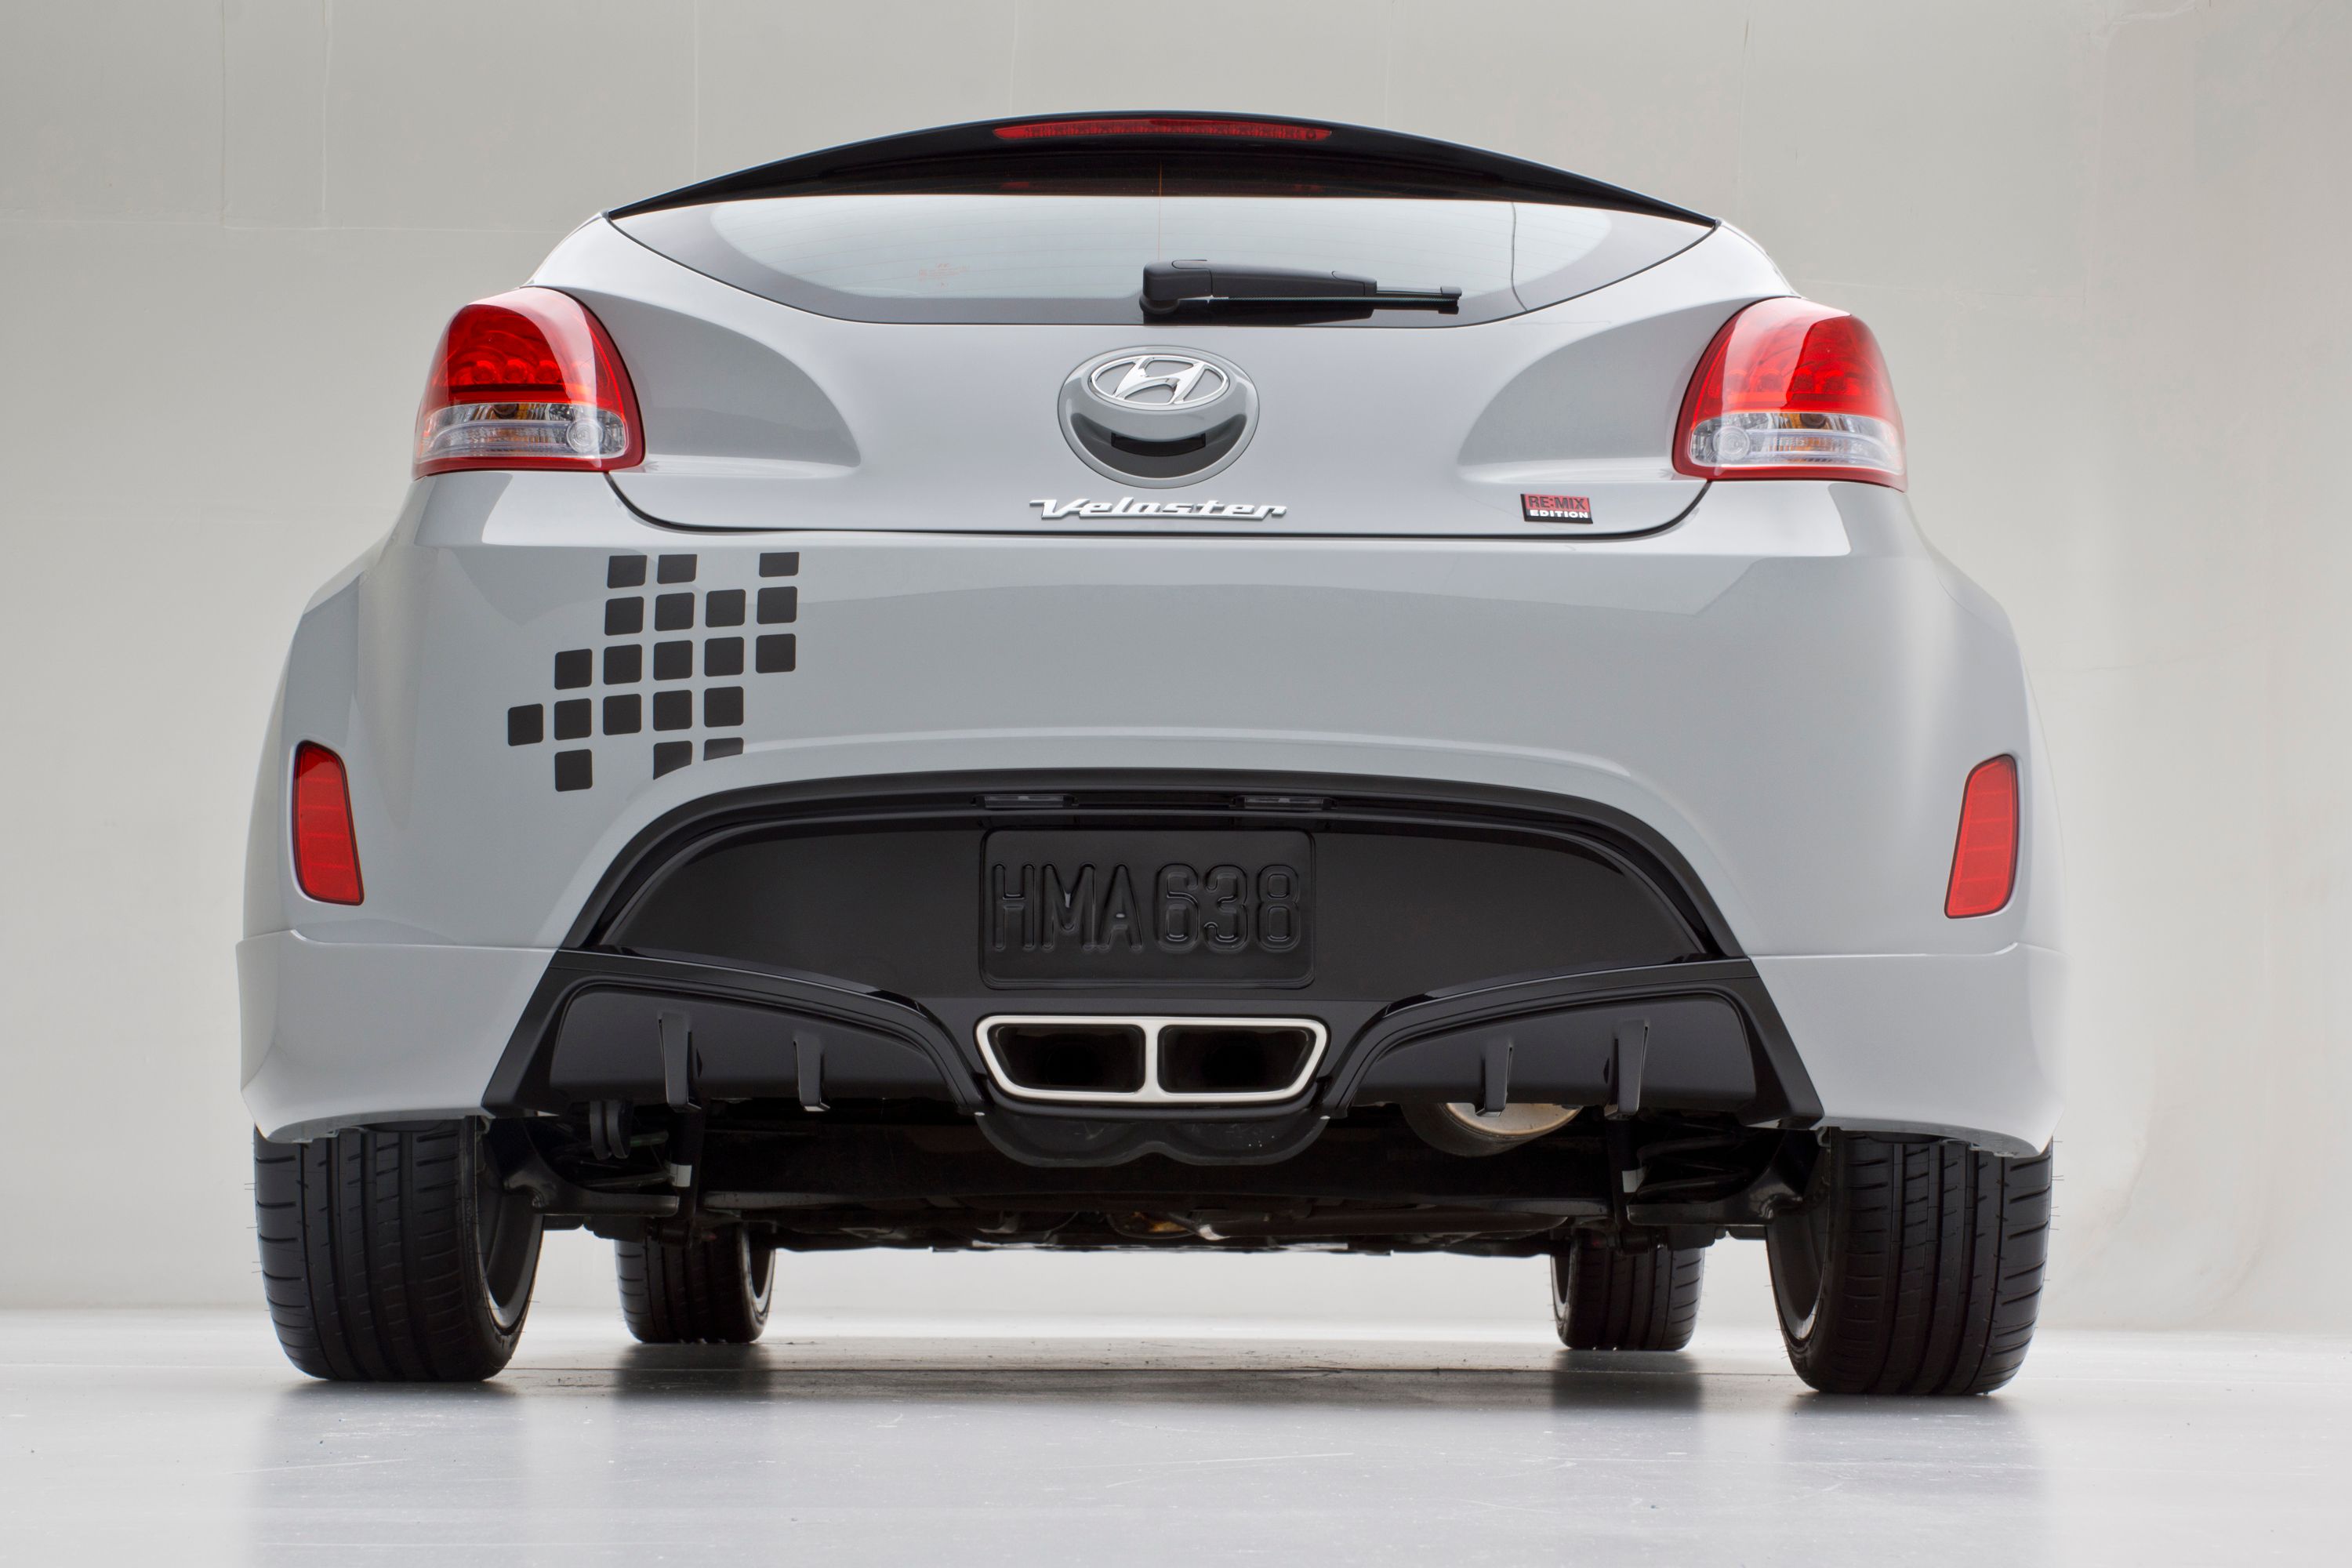 2013 Hyundai Veloster RE:MIX Edition